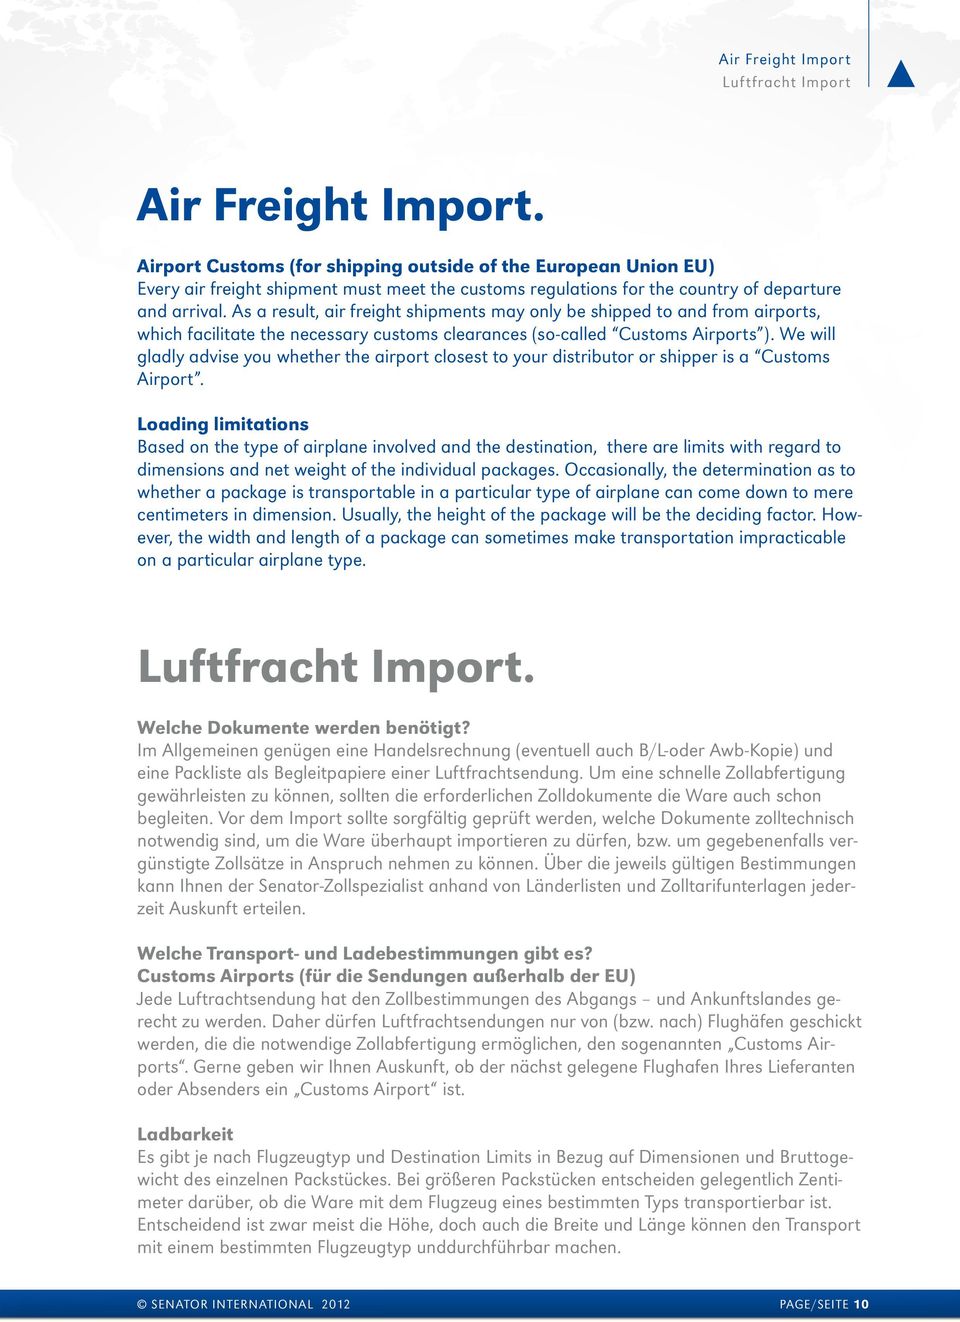 As a result, air freight shipments may only be shipped to and from airports, which facilitate the necessary customs clearances (so-called Customs Airports ).